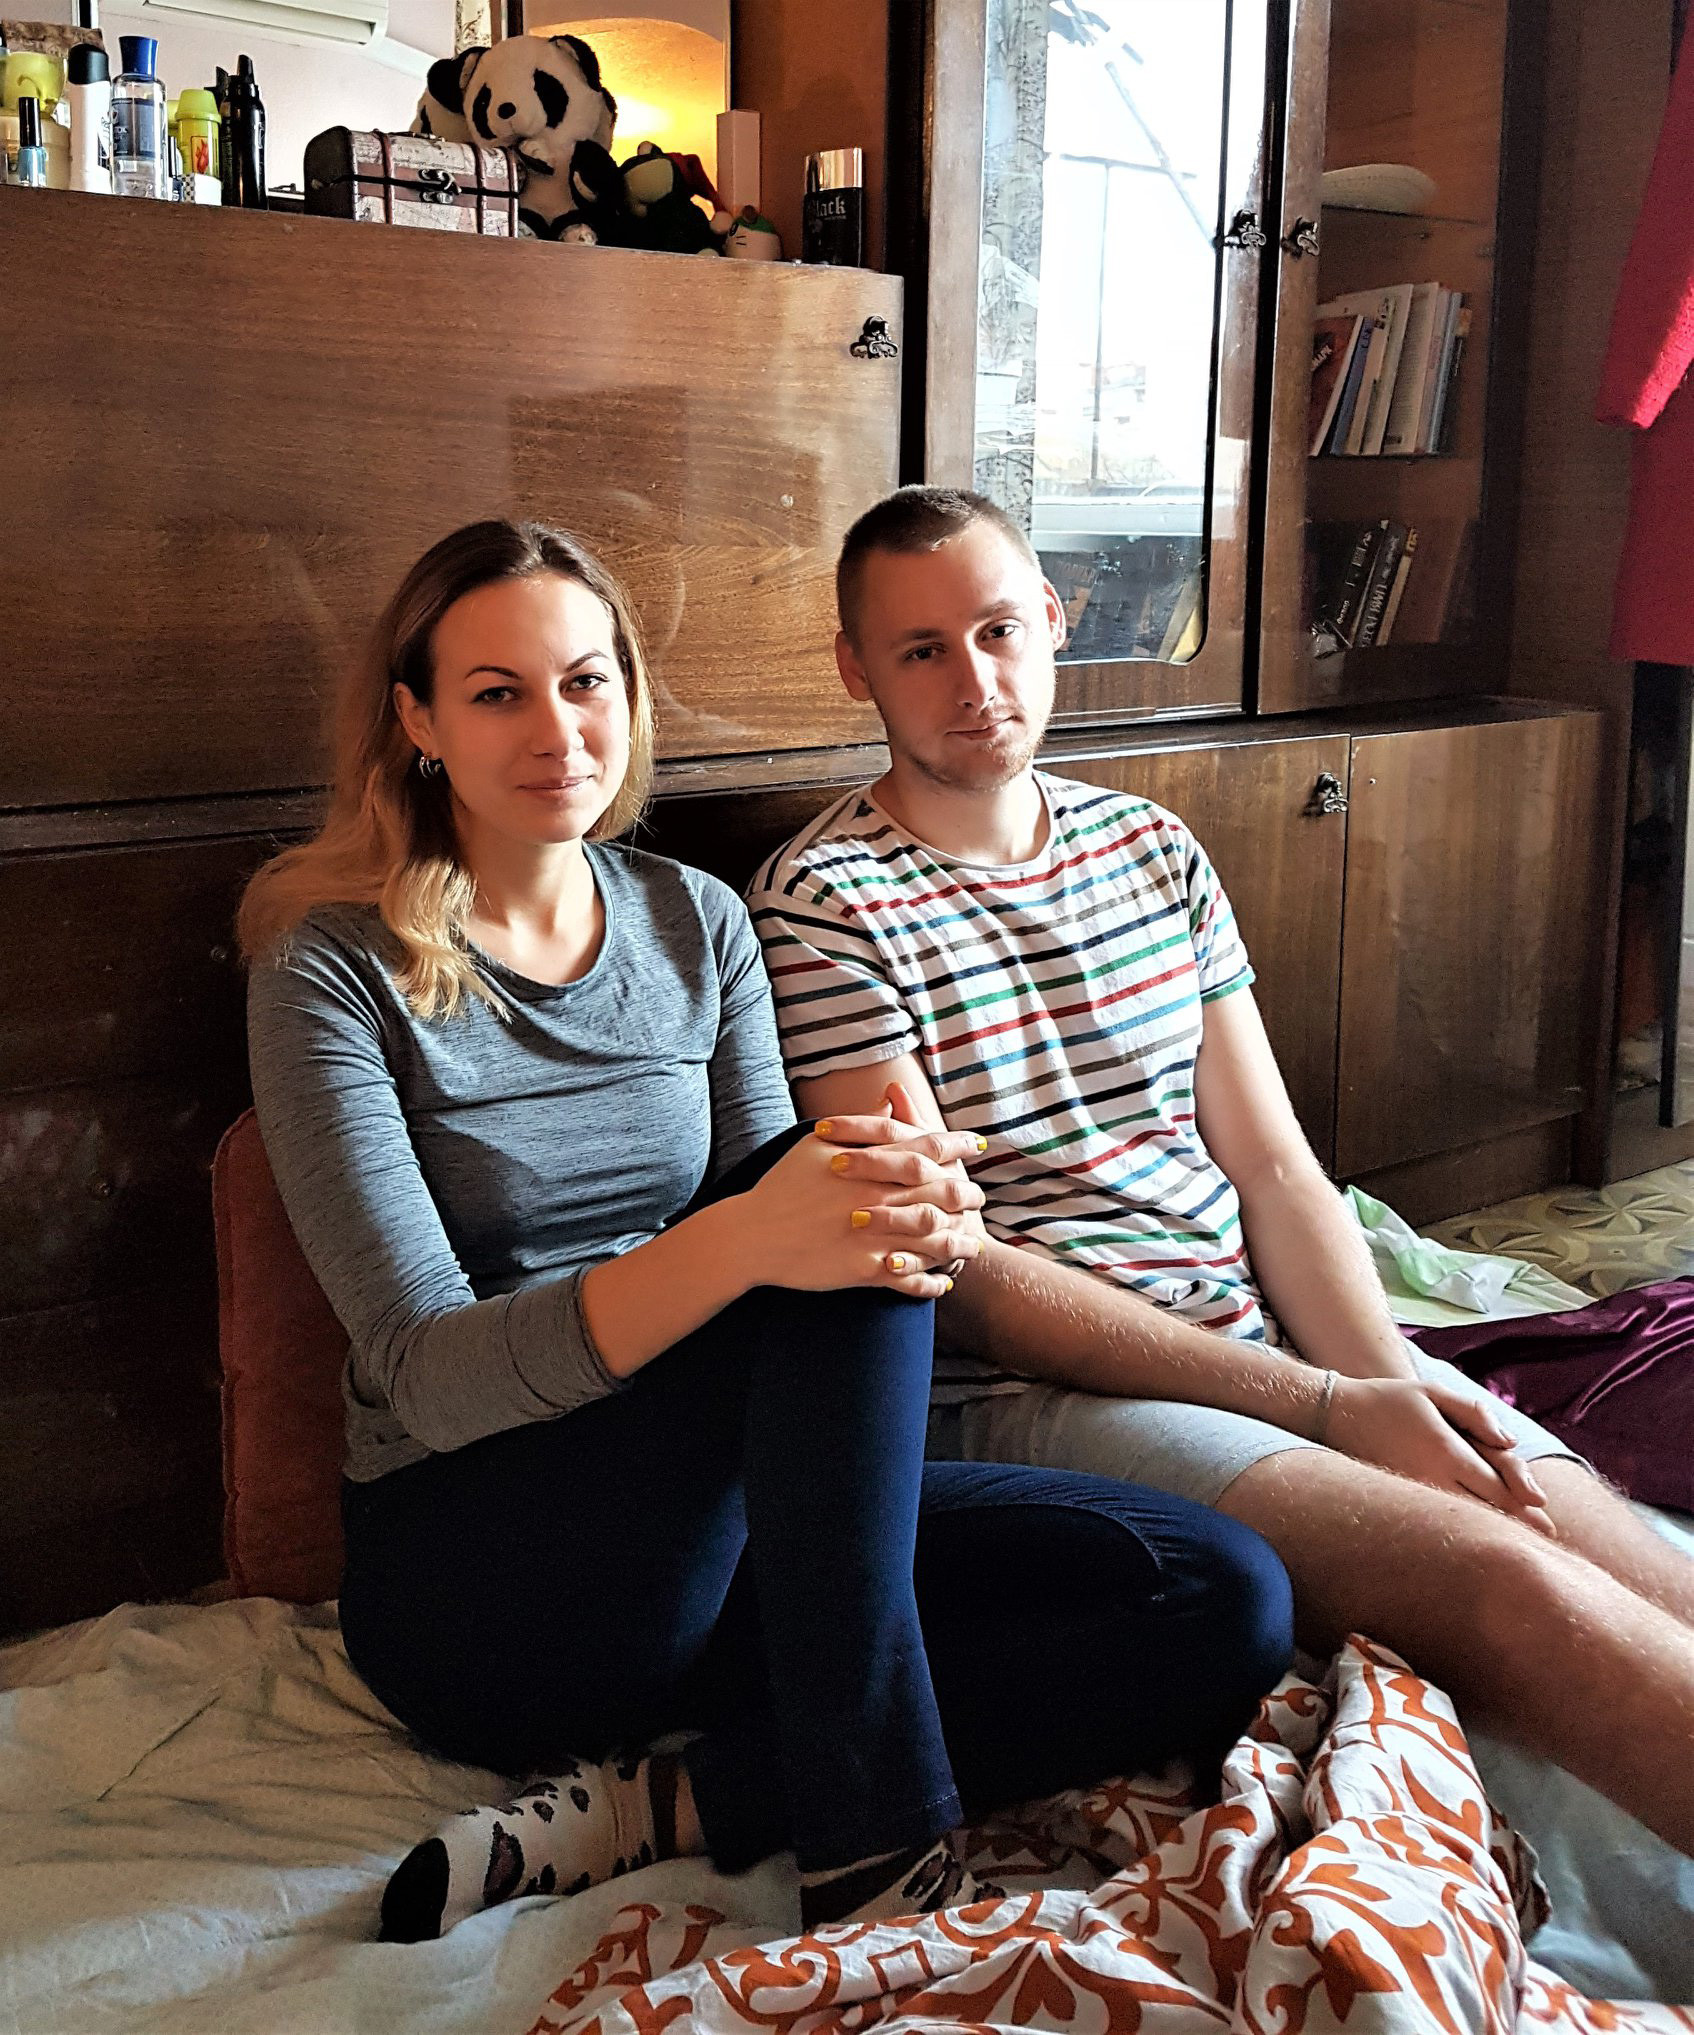 Roman and Masha live in a small flat in central Sloviansk, east Ukraine. They work for the NGO 